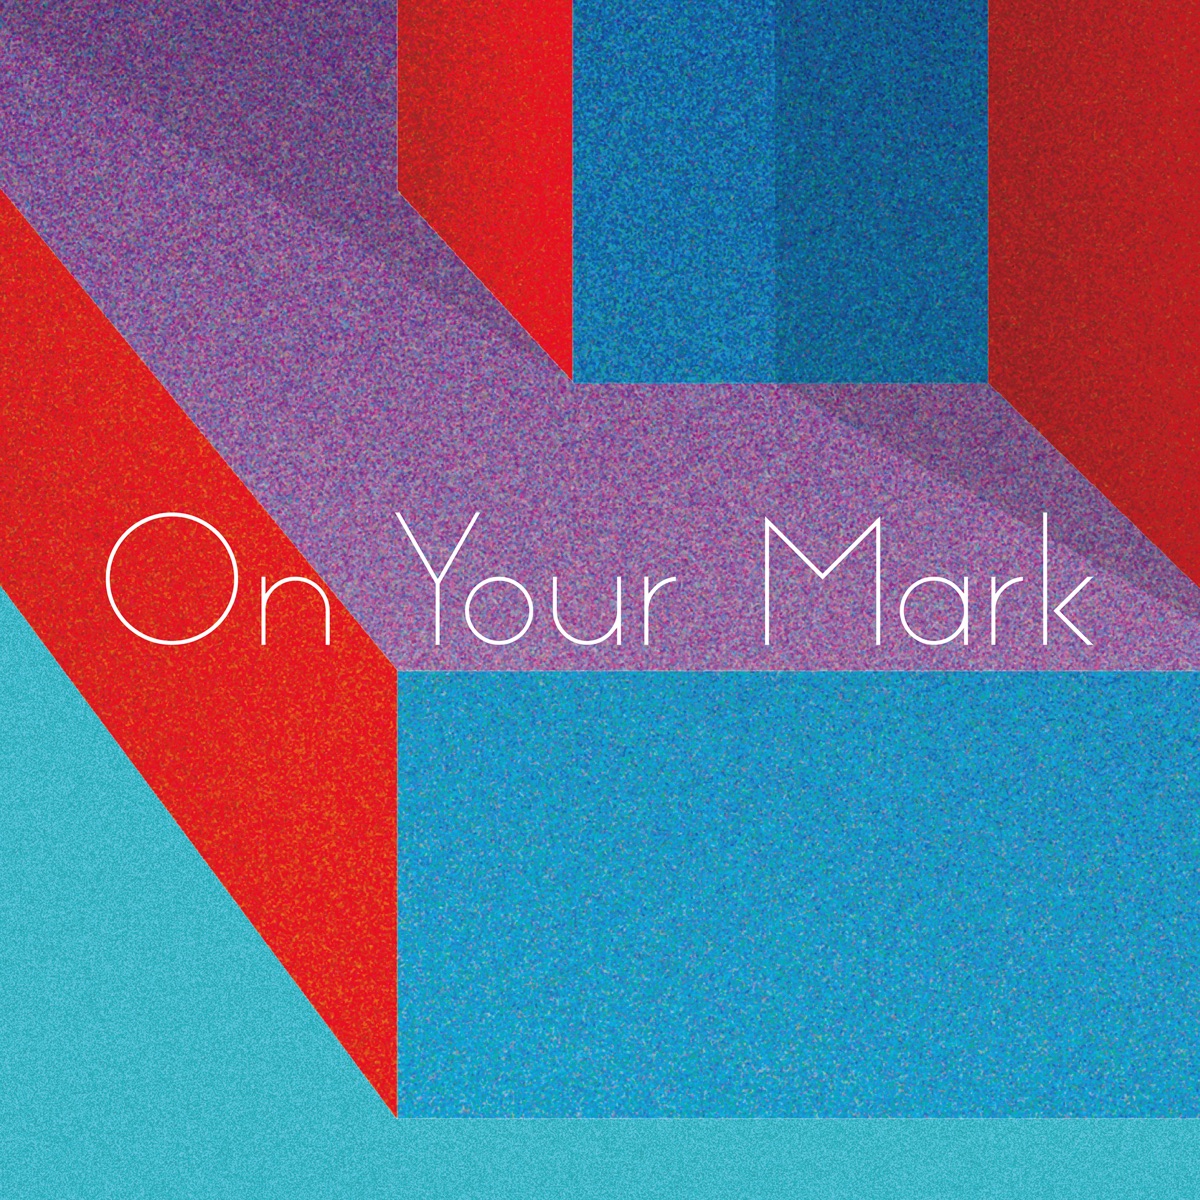 『Awesome City Club - On Your Mark』収録の『On Your Mark』ジャケット